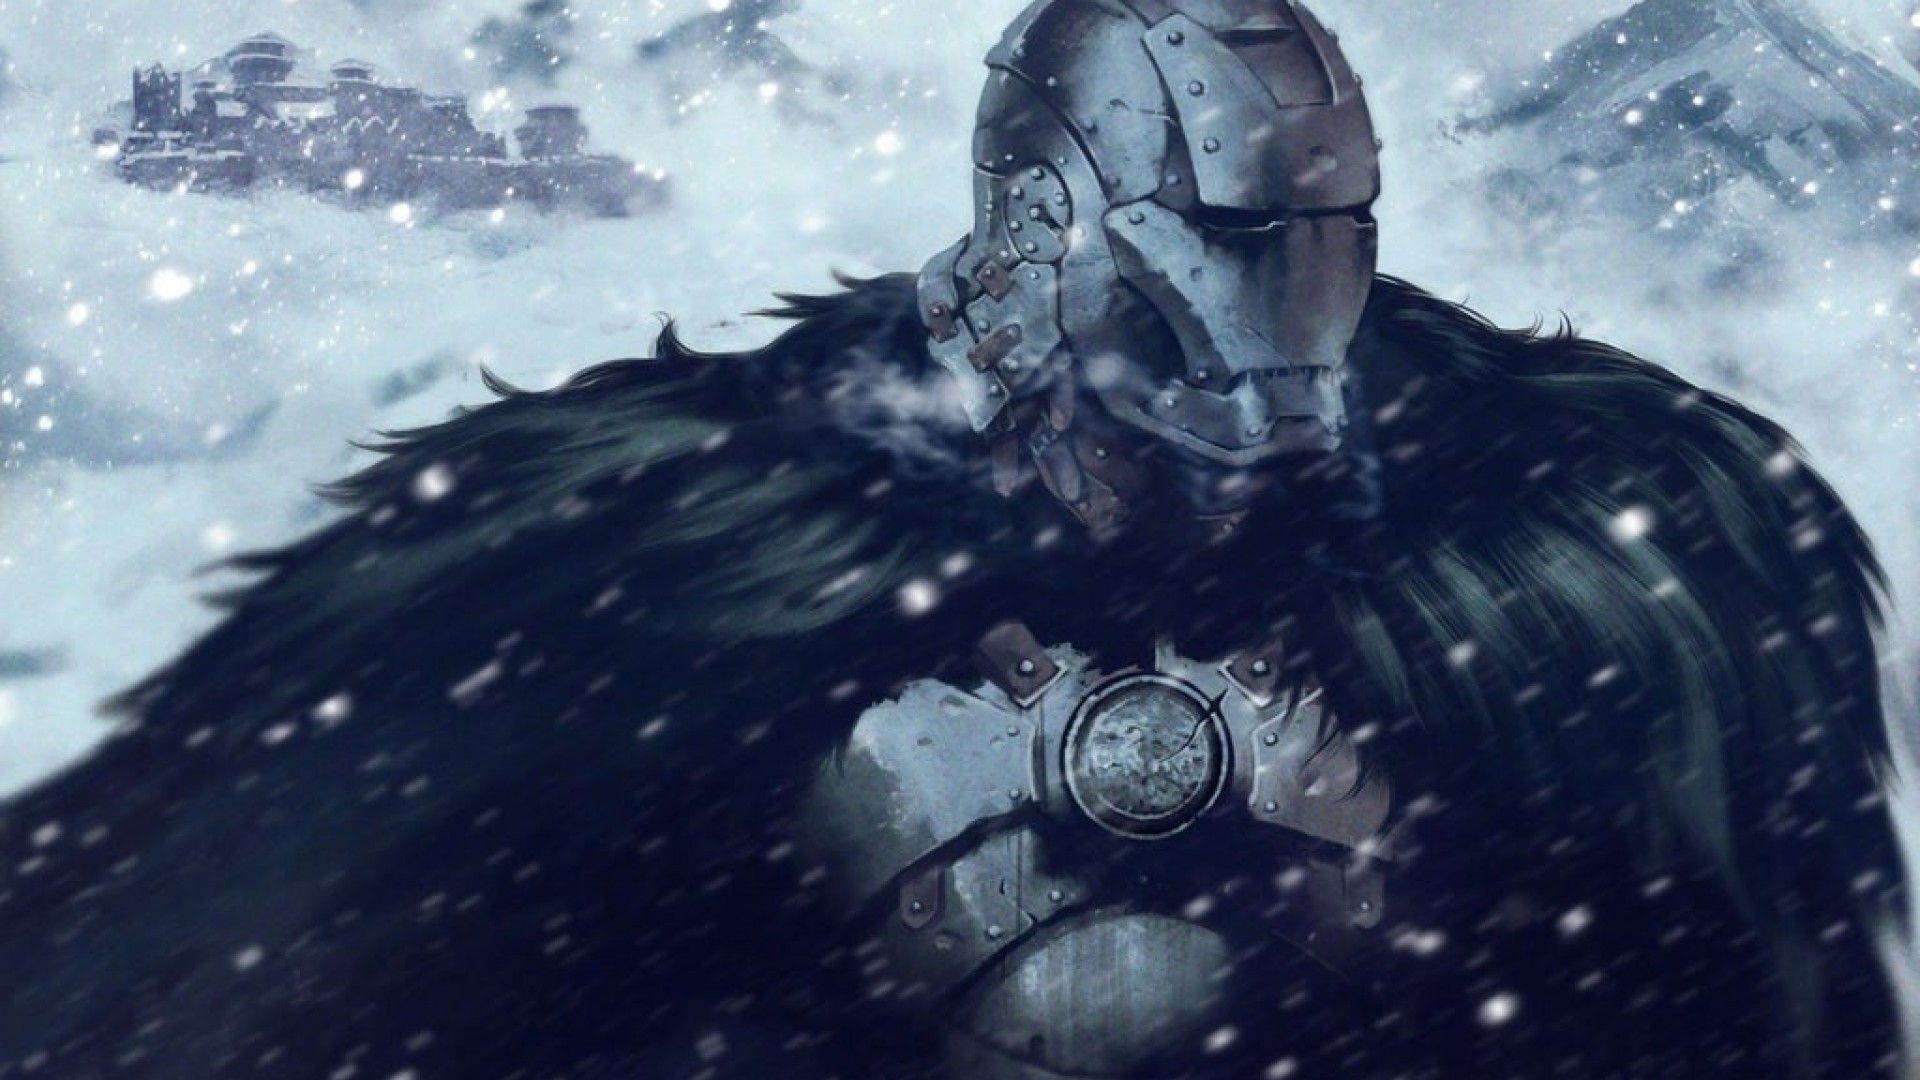 Game Of Thrones, Iron Man, Crossover, Snow, House Stark Wallpaper